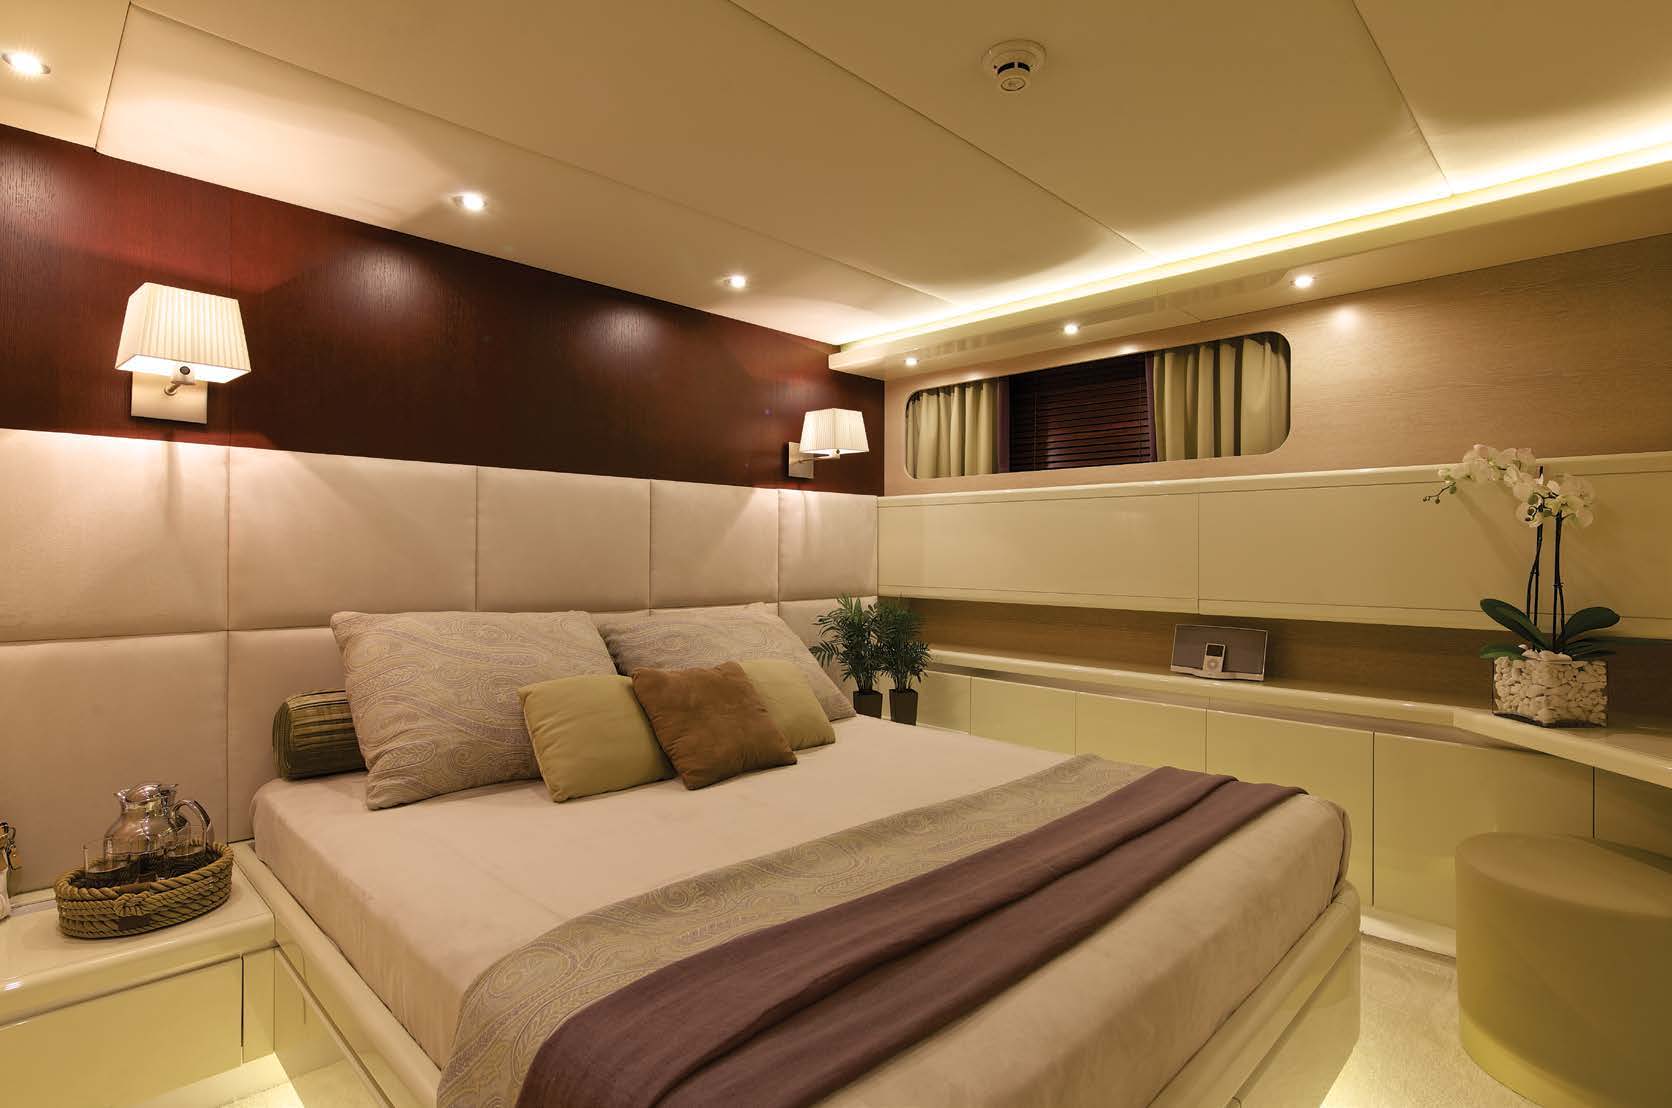 Double Stateroom On The Lower Deck